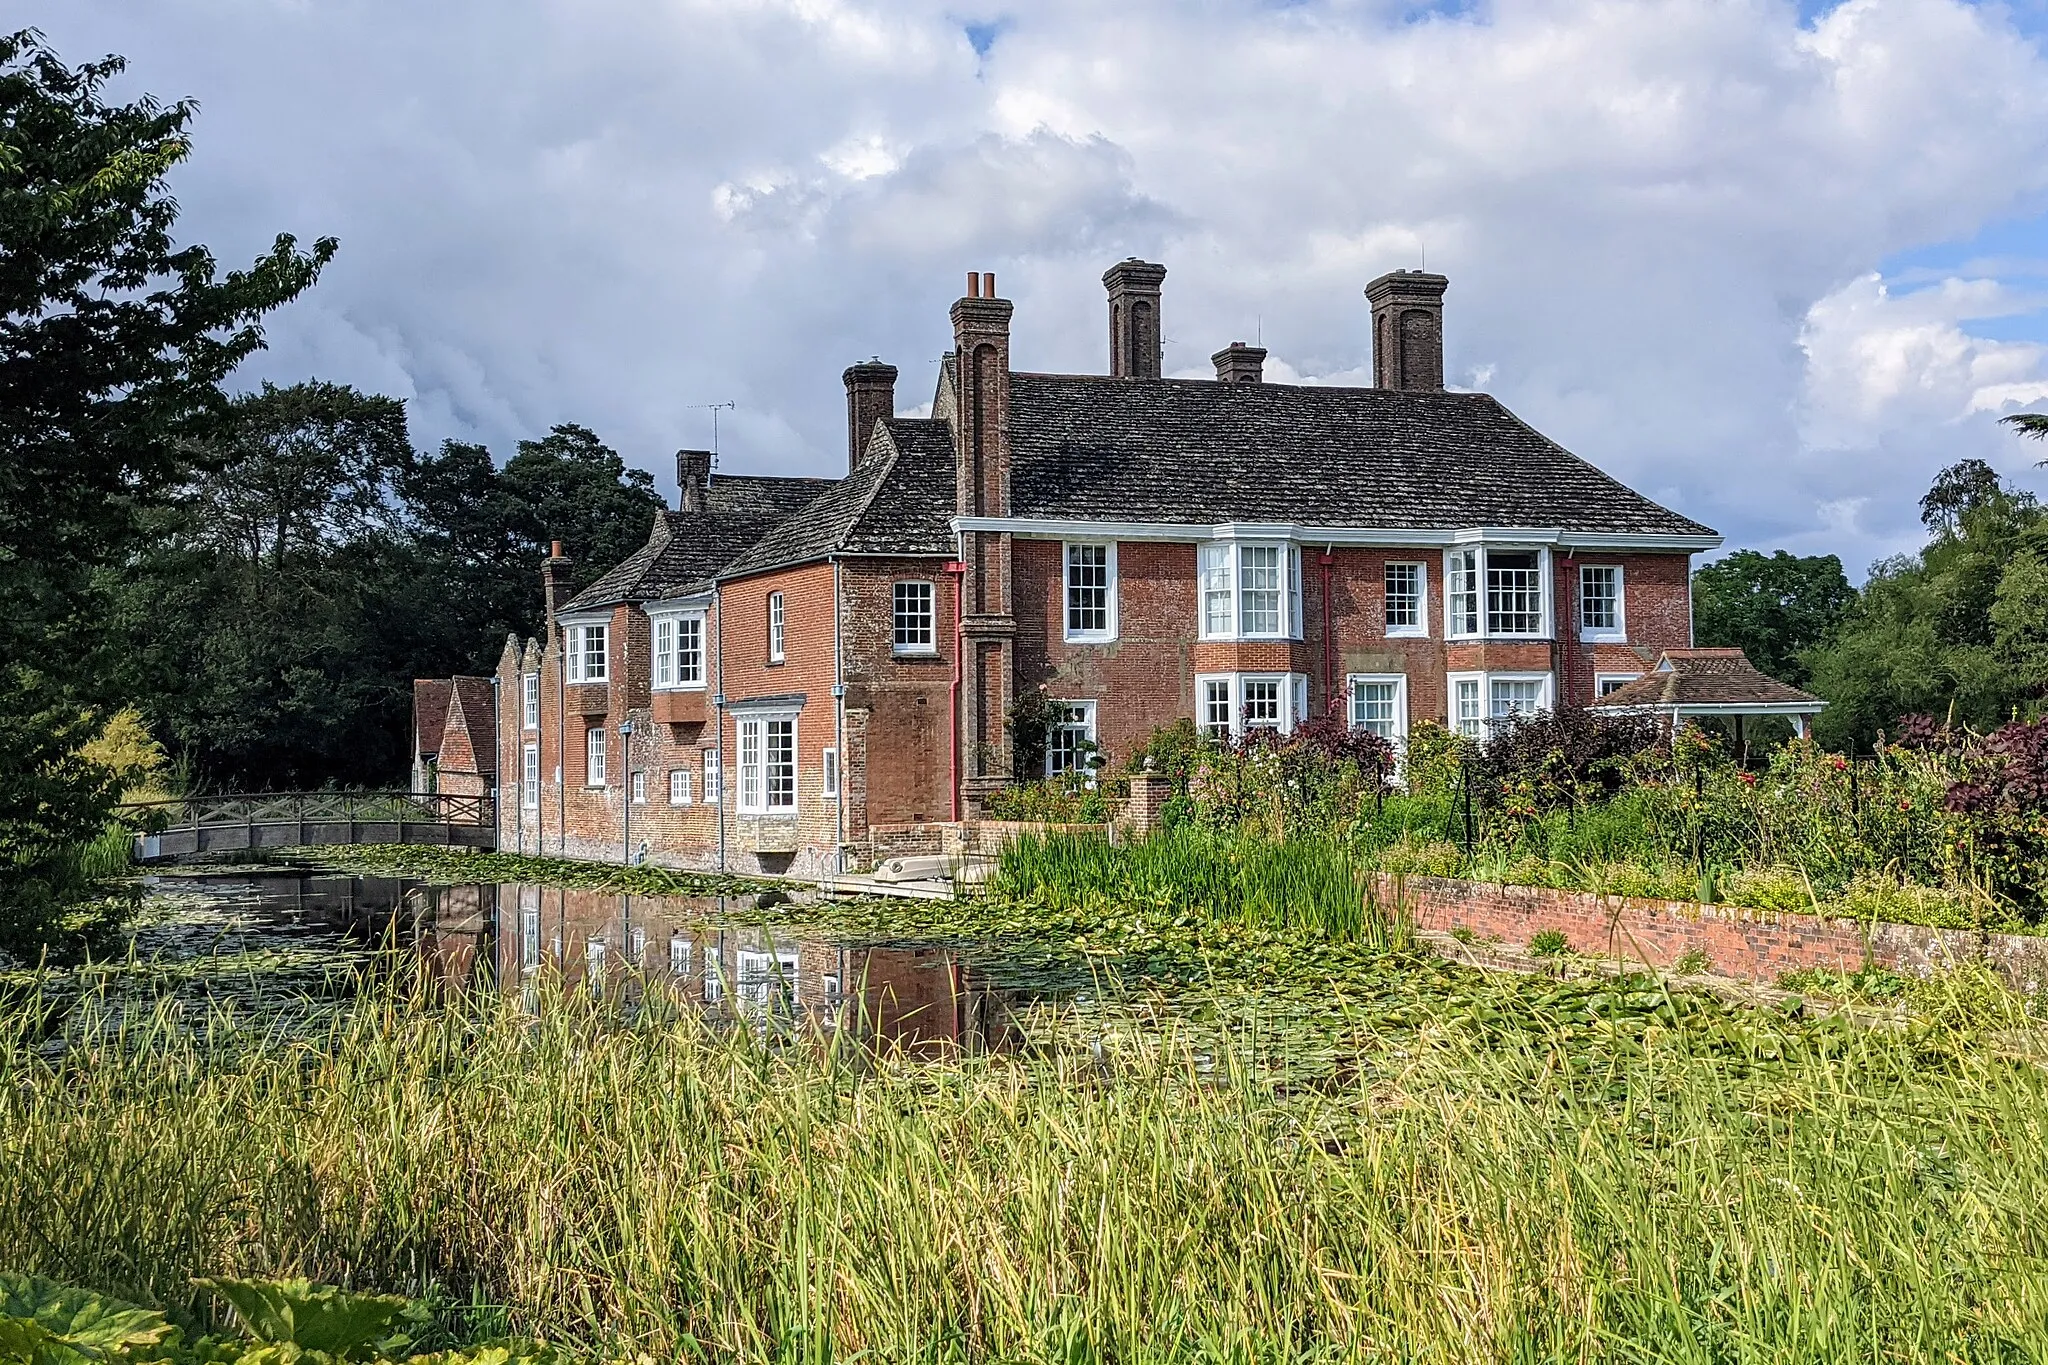 Photo showing: Newtimber Place is a manor house in the parish of Newtimber